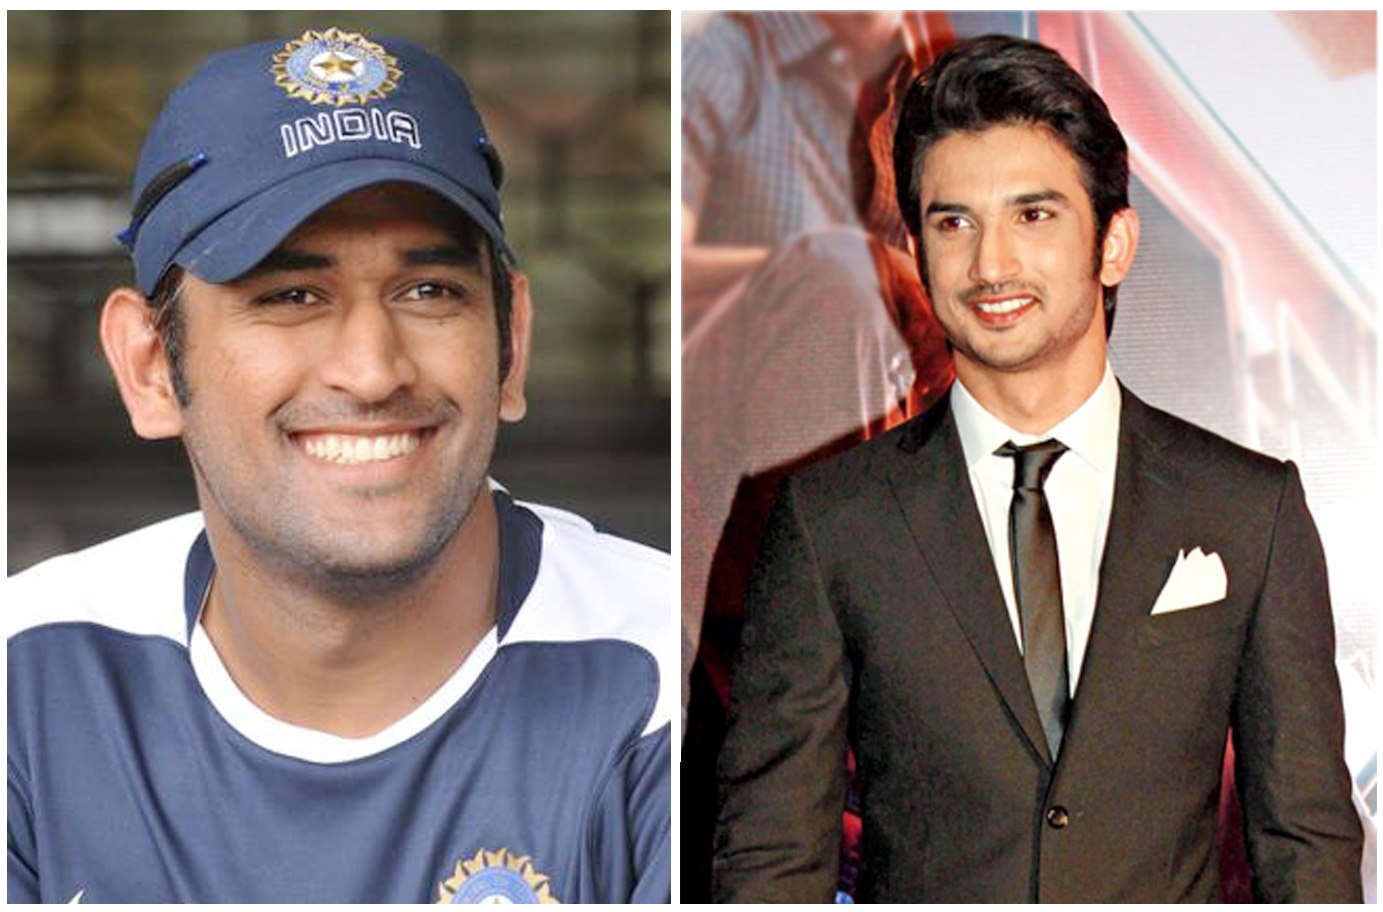 MS Dhoni Biopic: Portraying MS Dhoni on screen is challenging, says Sushant